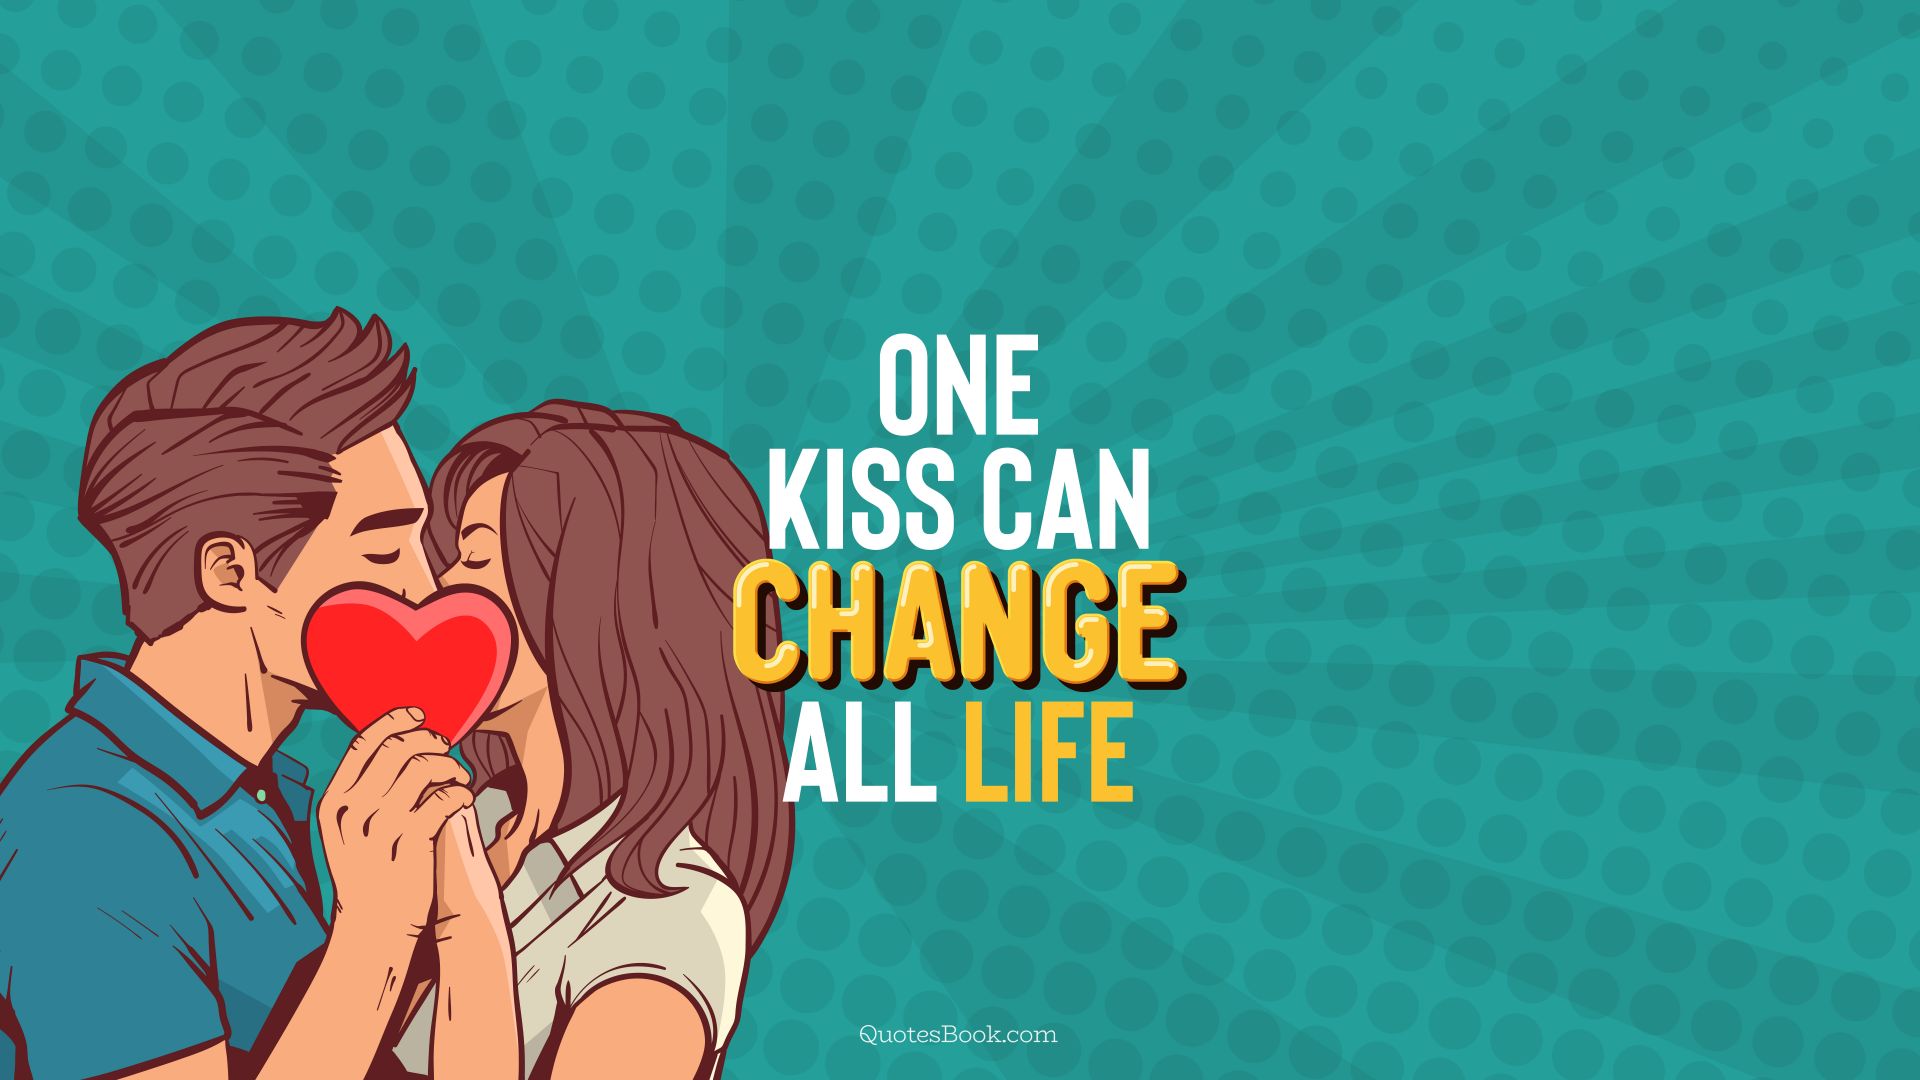 One kiss can change all life. - Quote by QuotesBook